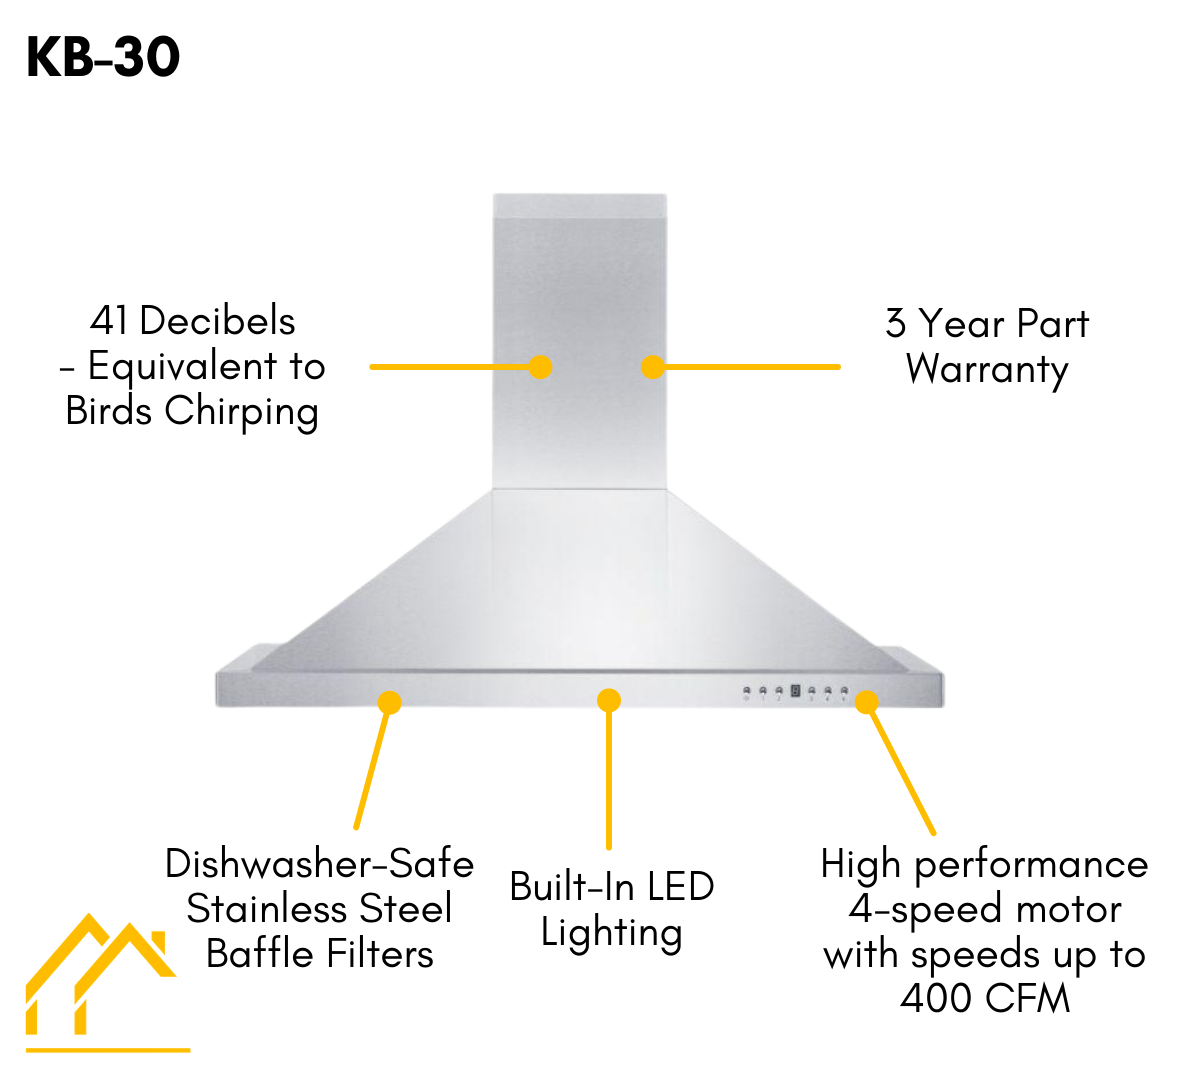 ZLINE 30" Kitchen Package with Stainless Steel Dual Fuel Range and Convertible Vent Range Hood